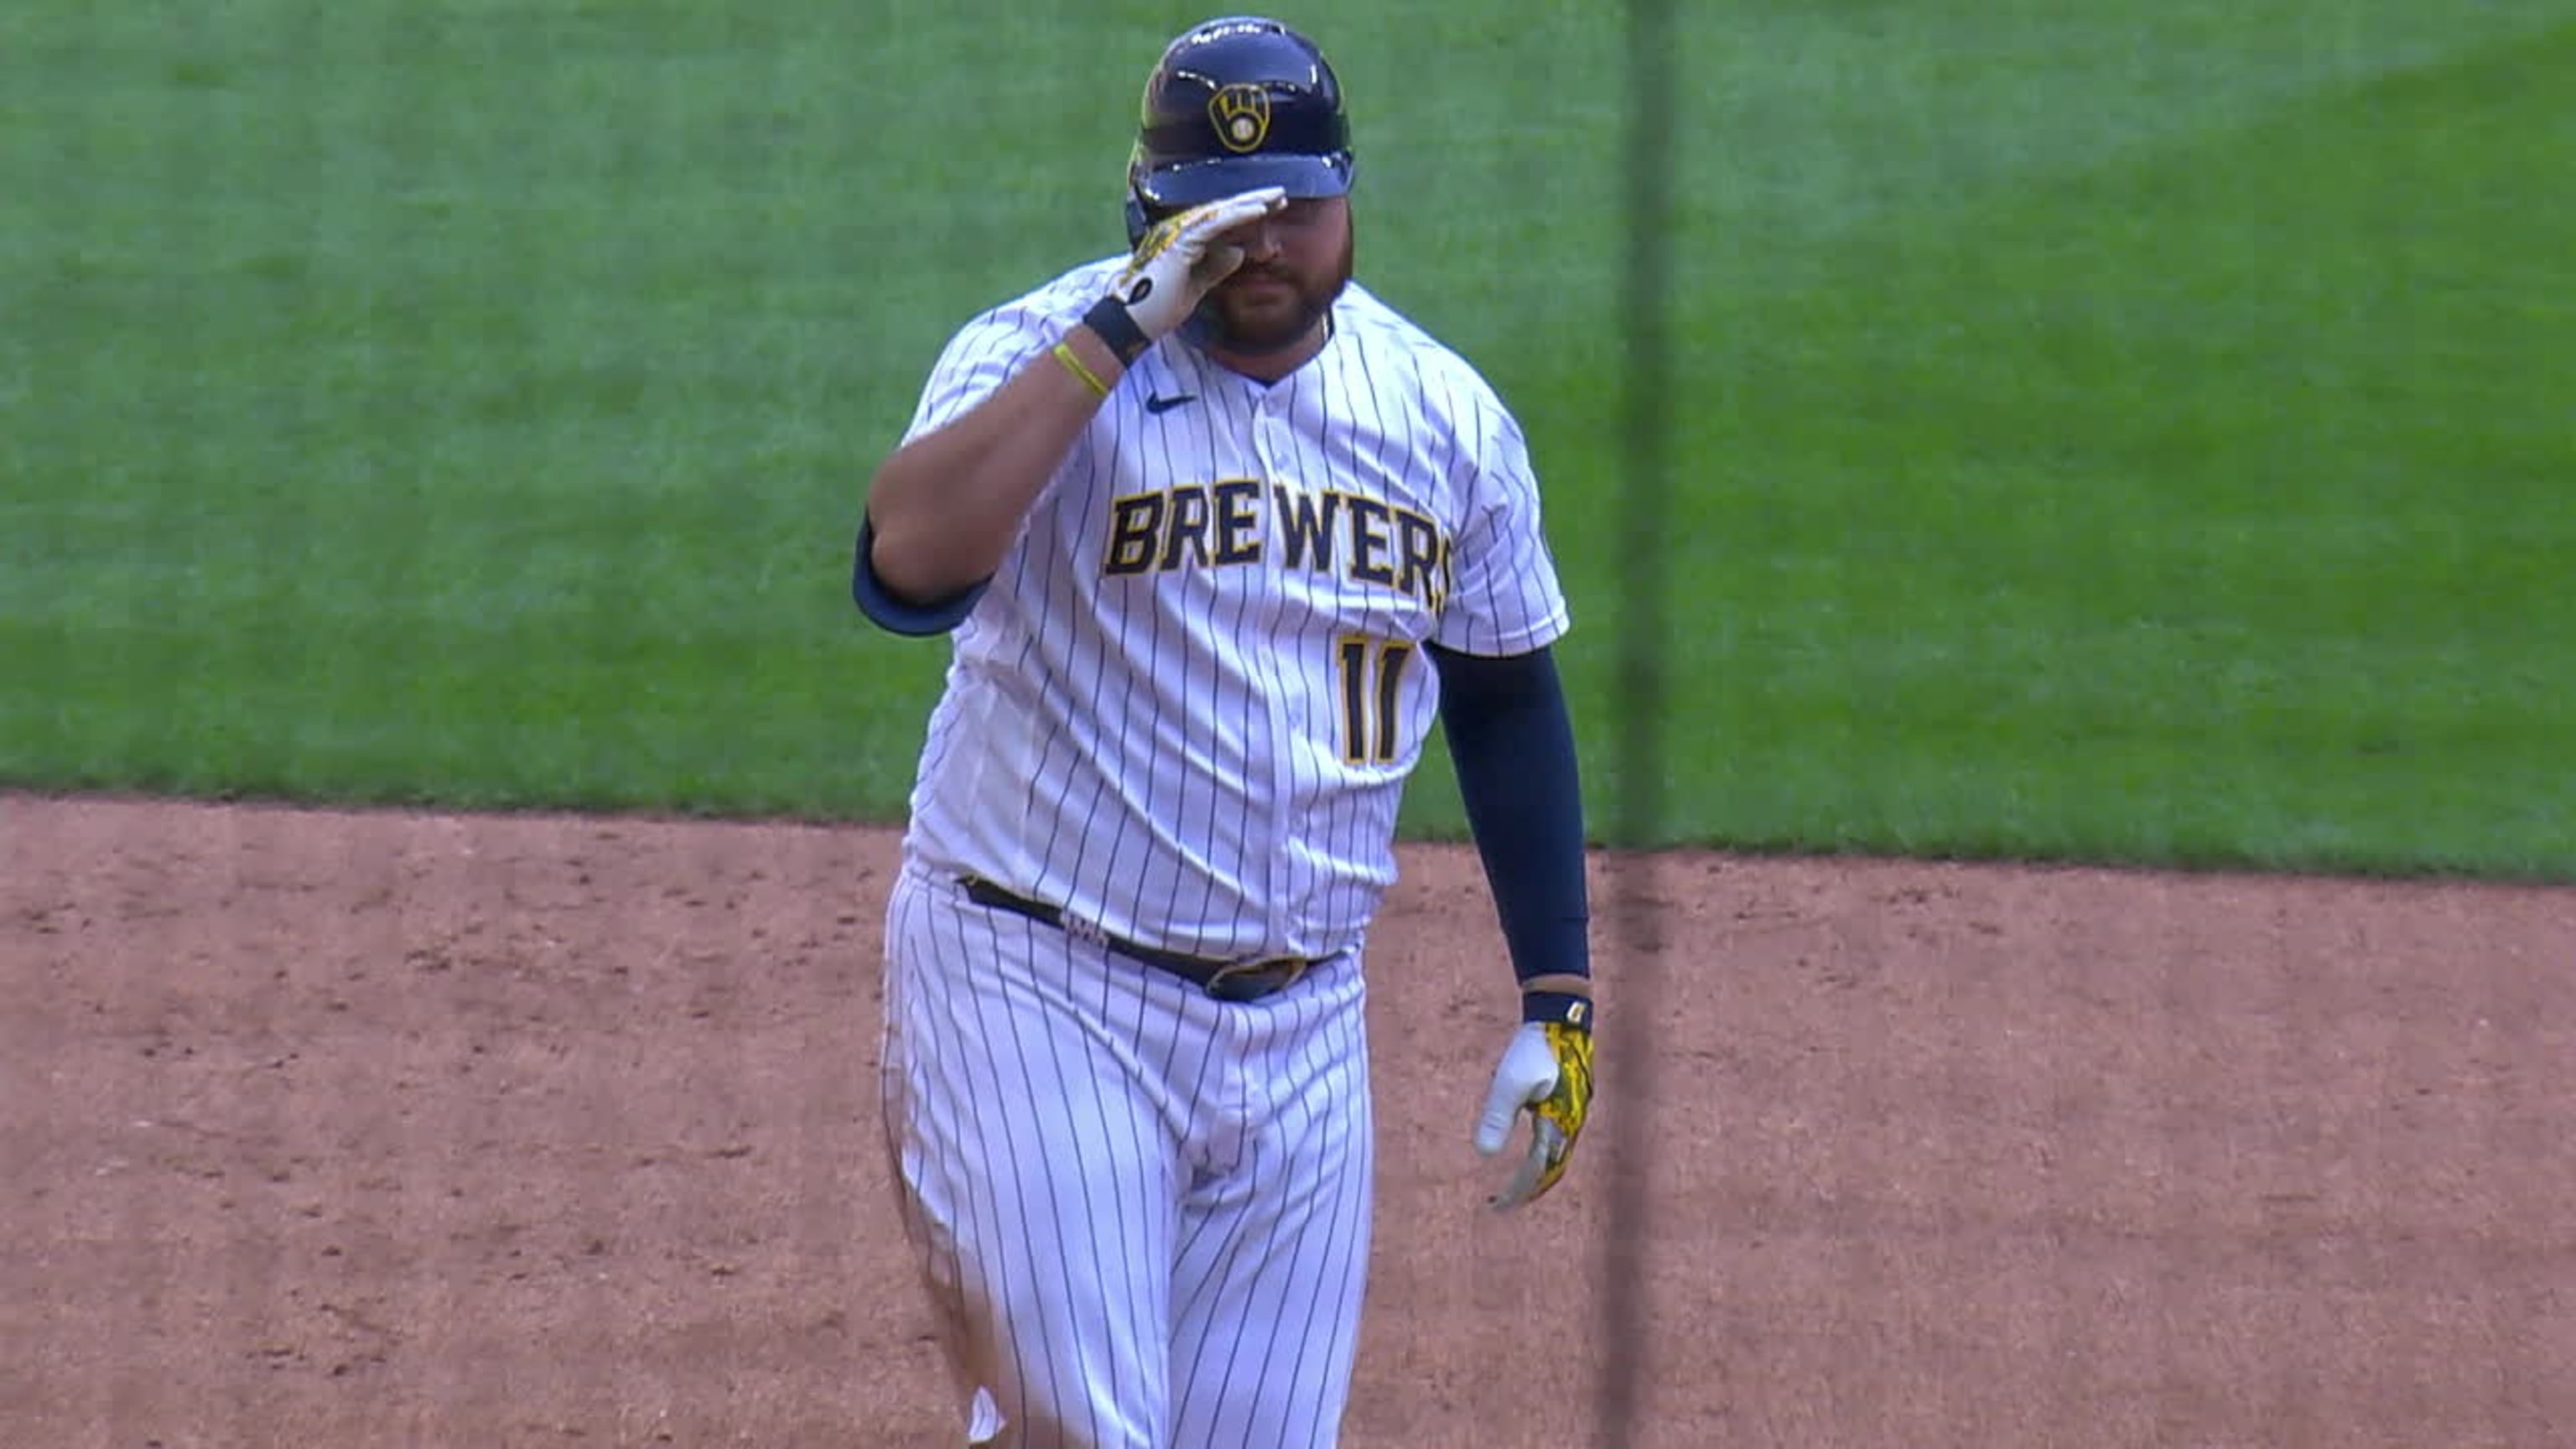 Rowdy Tellez in line to snap wild, years-long streak for Brewers